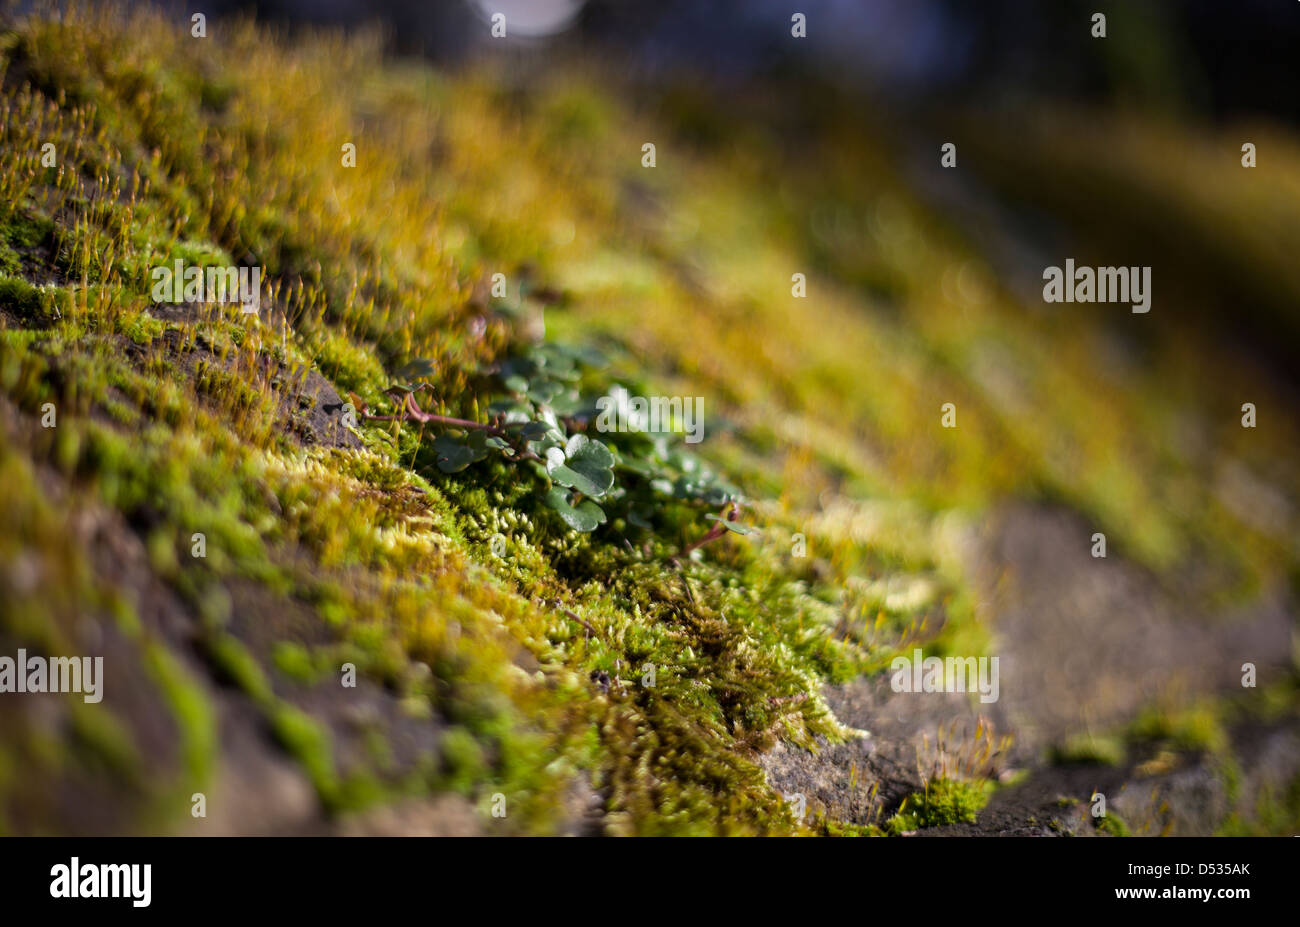 Liverwort and Moss on a Brick Wall Stock Photo